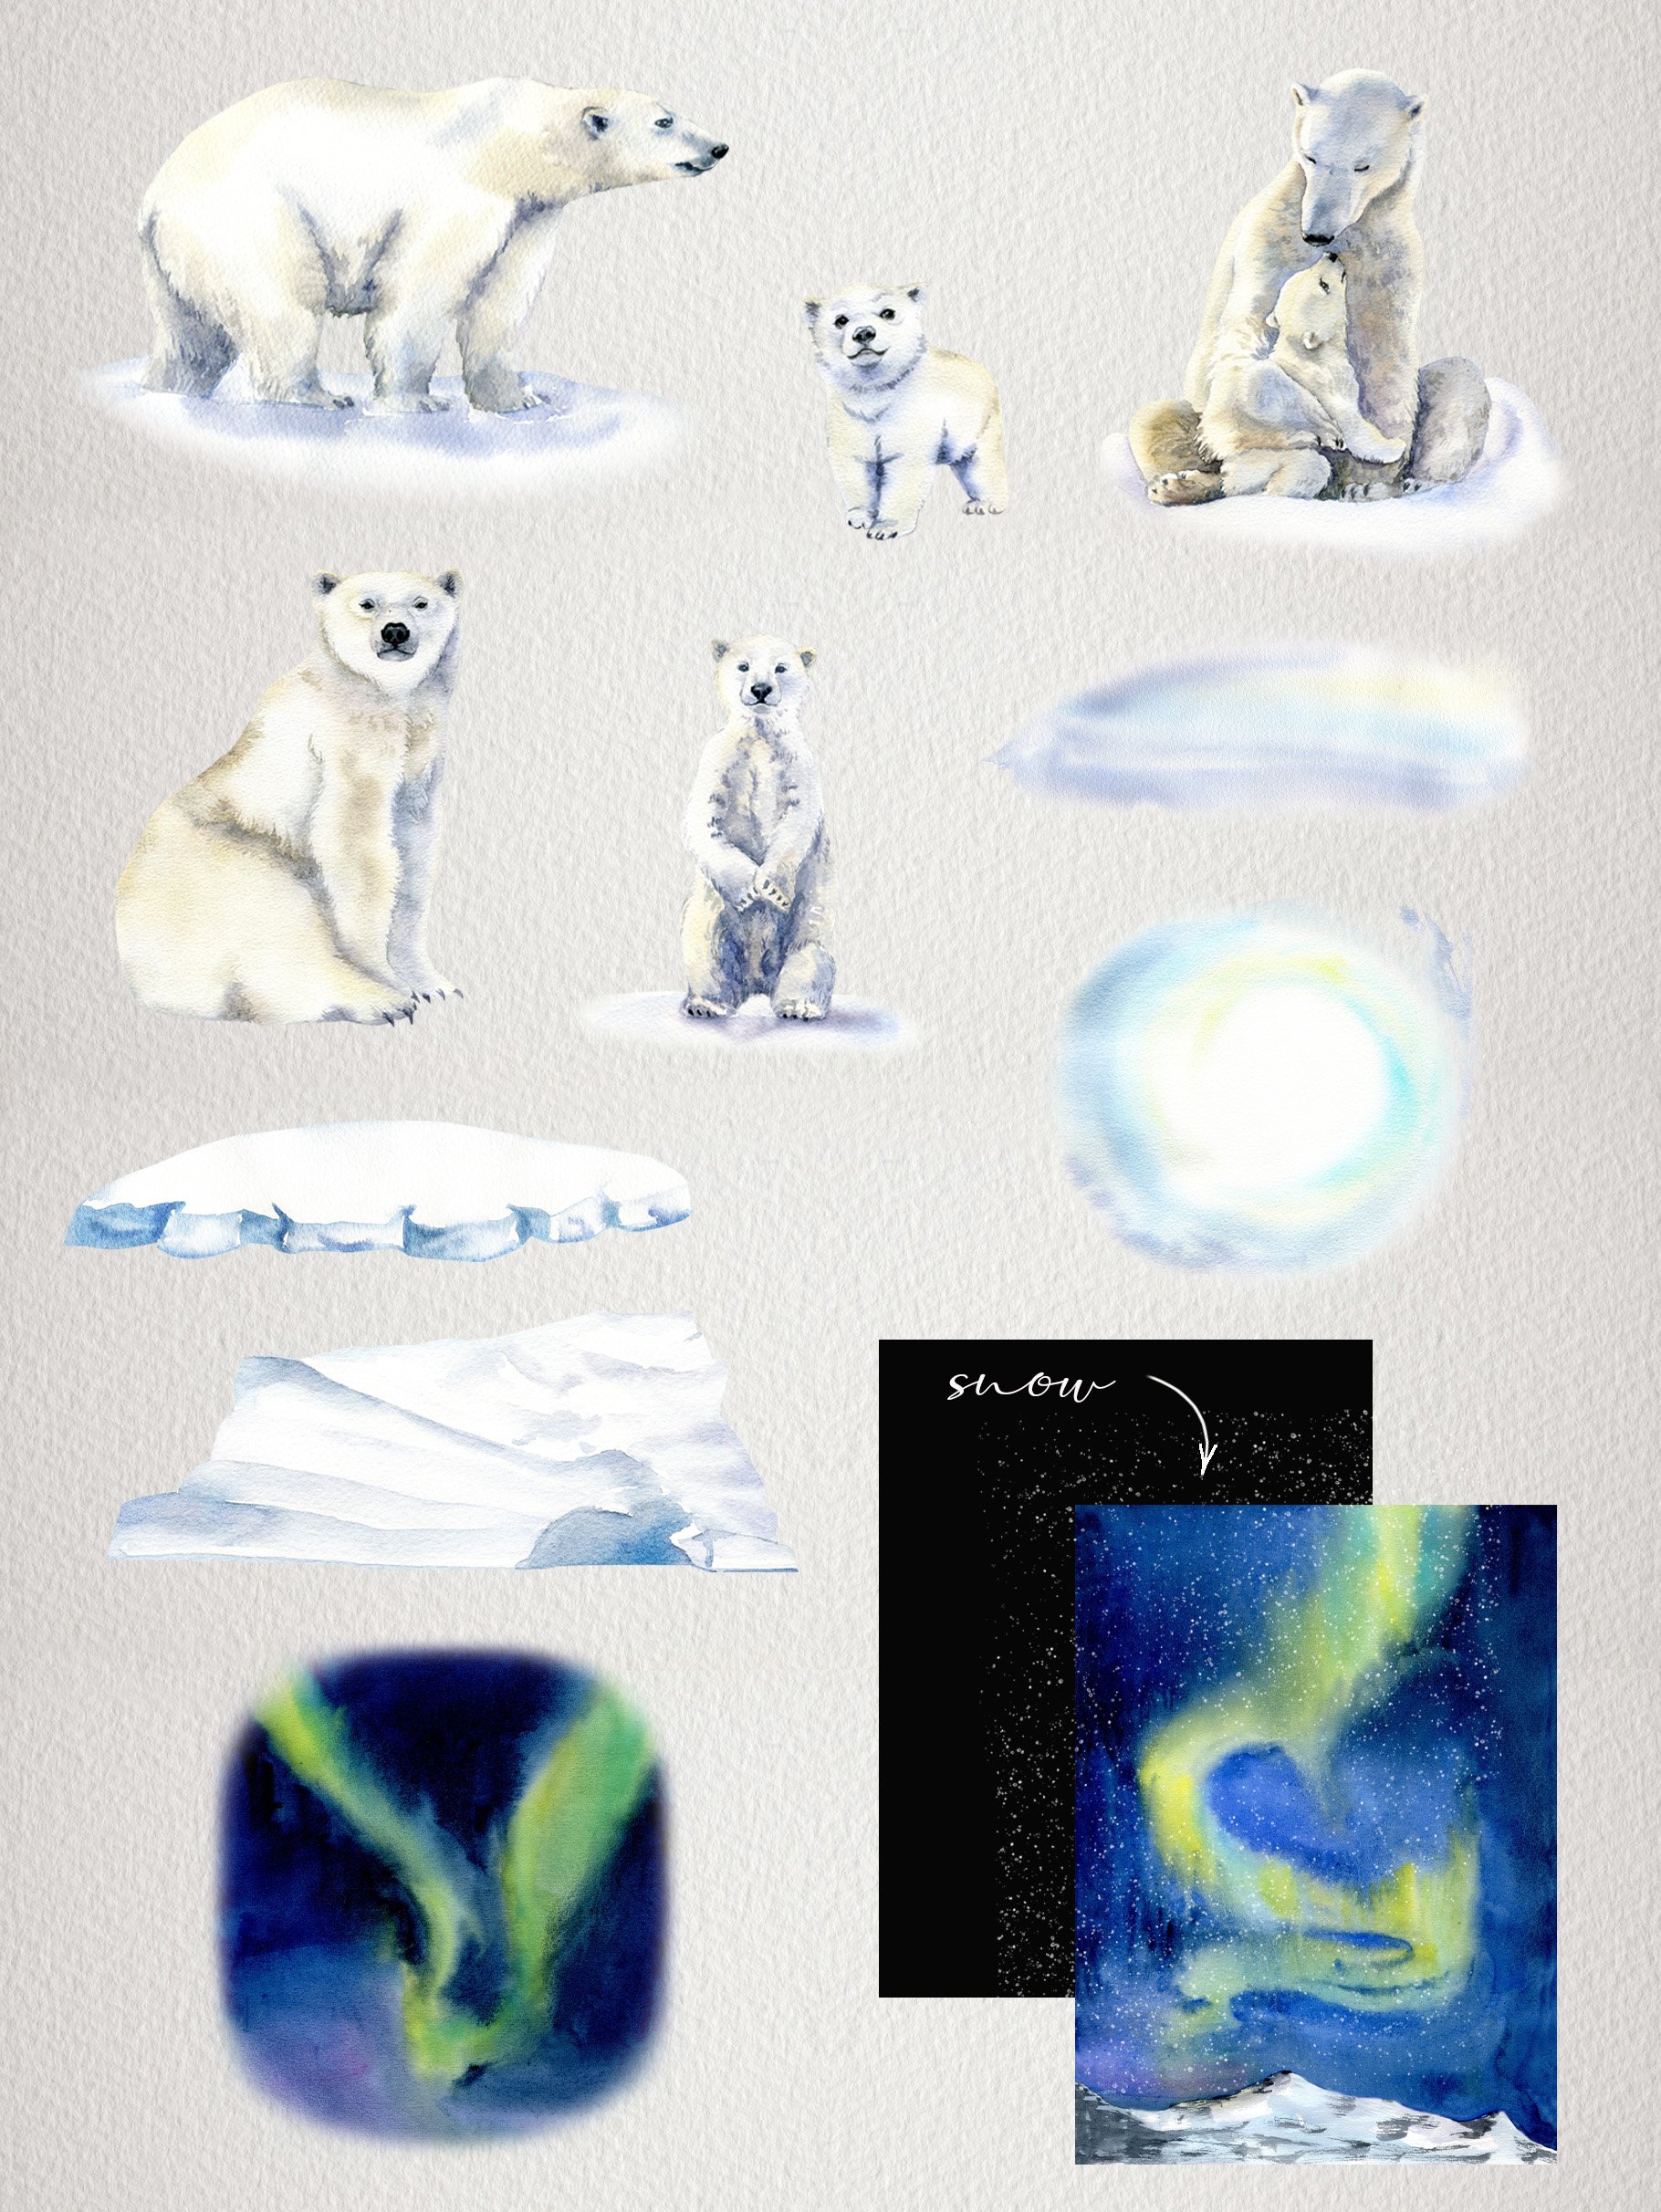 Nice set with different elements for illustration with polar bears.